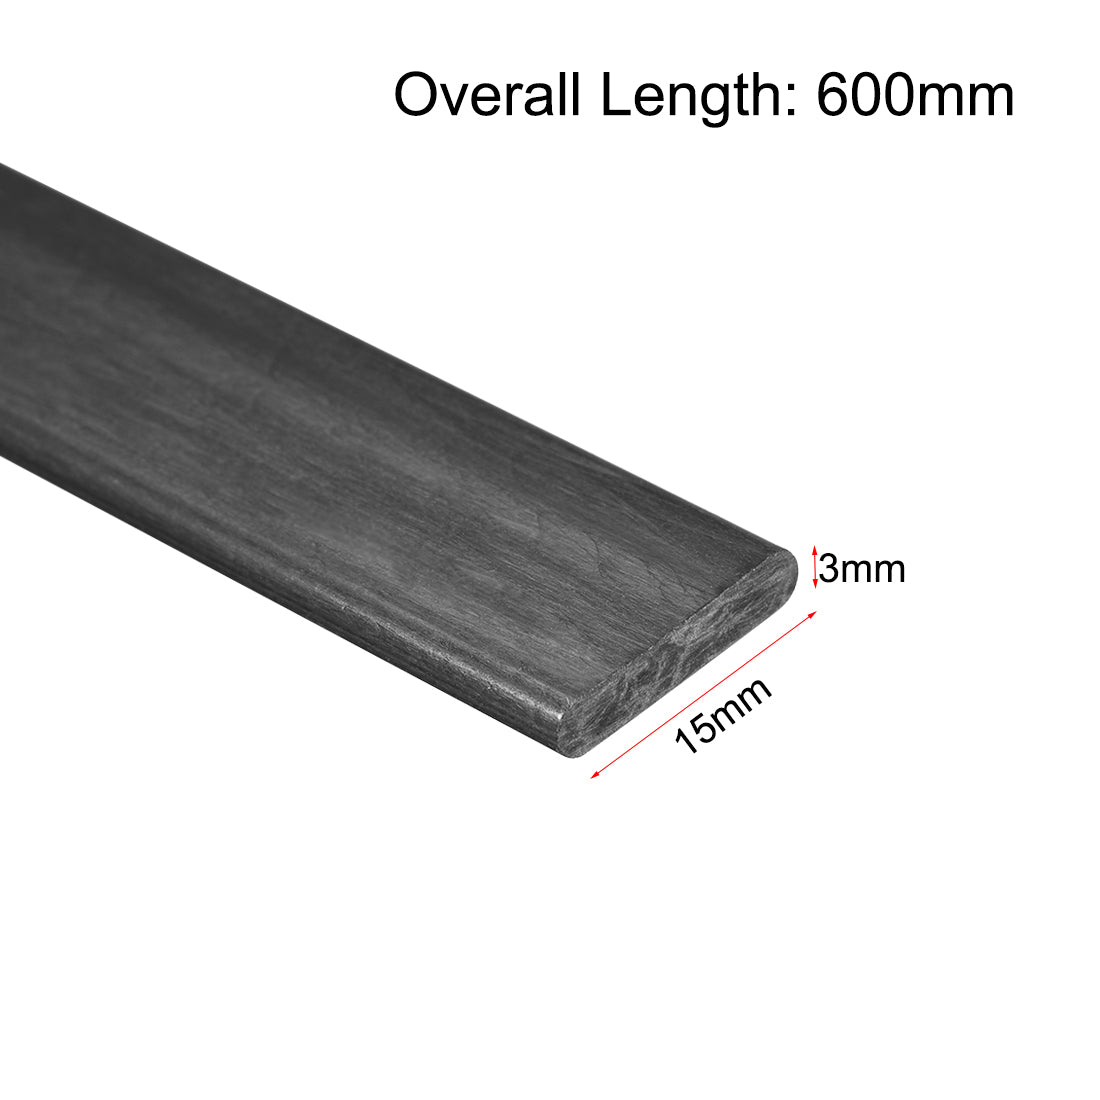 uxcell Uxcell Carbon Fiber Strip Bars 3x15mm 600mm Length Pultruded Carbon Fiber Strips for Kites, RC Airplane 1 Pcs